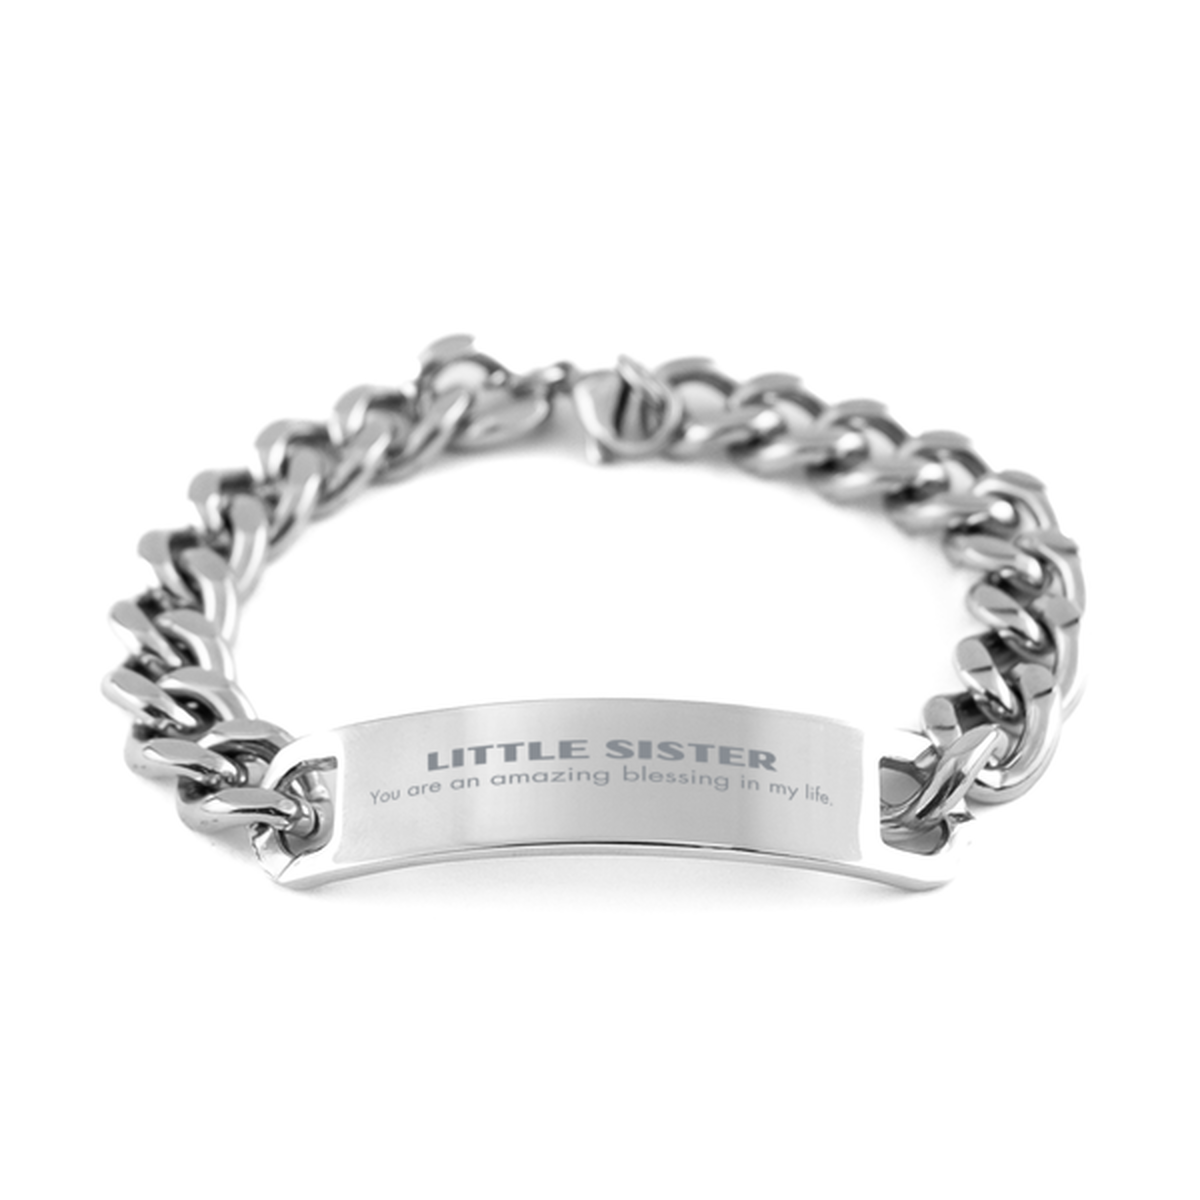 Little Sister Cuban Chain Stainless Steel Bracelet, You are an amazing blessing in my life, Thank You Gifts For Little Sister, Inspirational Birthday Christmas Unique Gifts For Little Sister